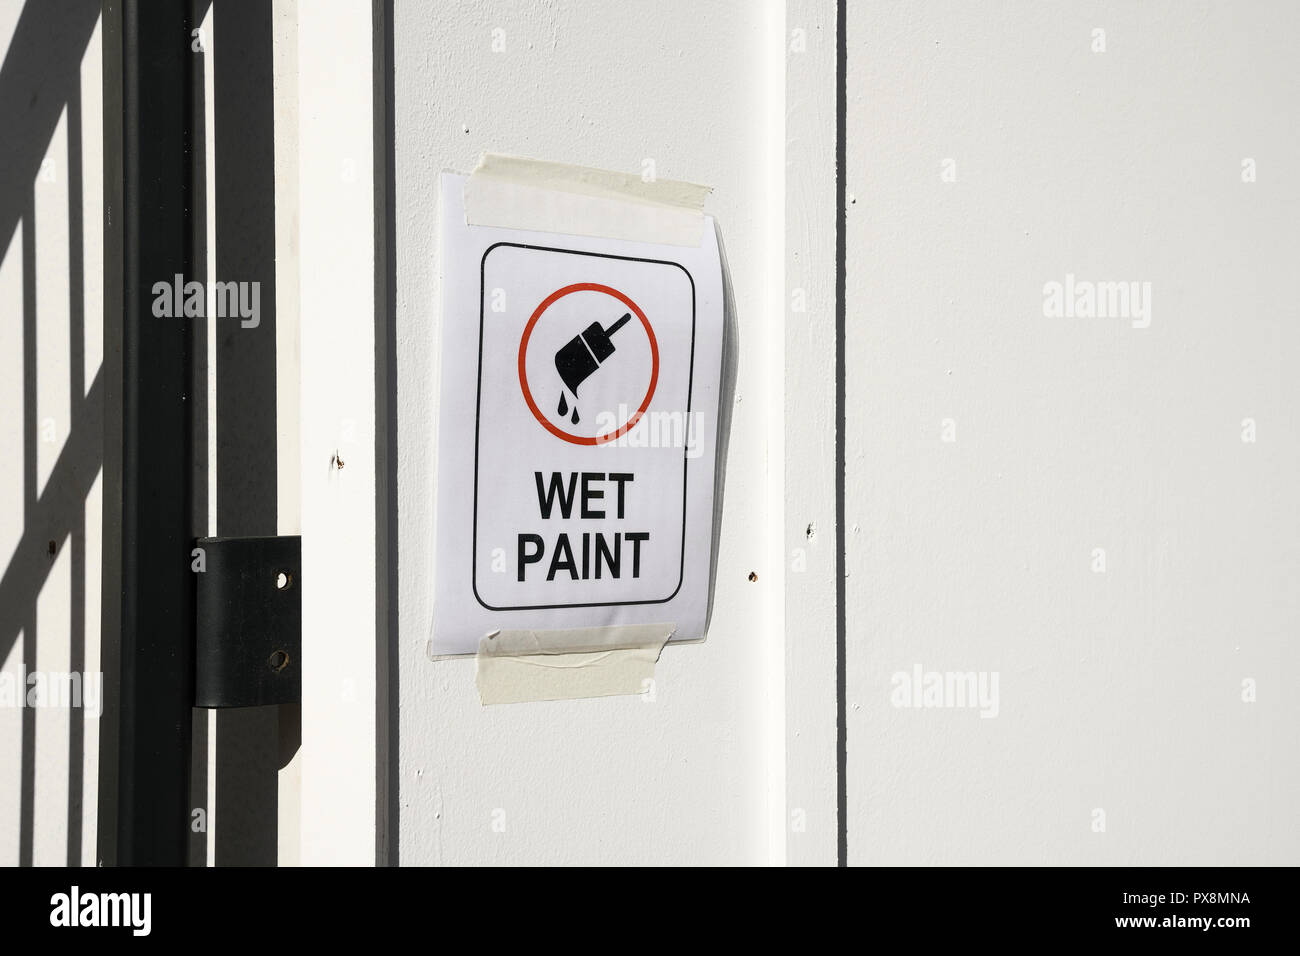 Wet paint sign on wooded hoarding Stock Photo